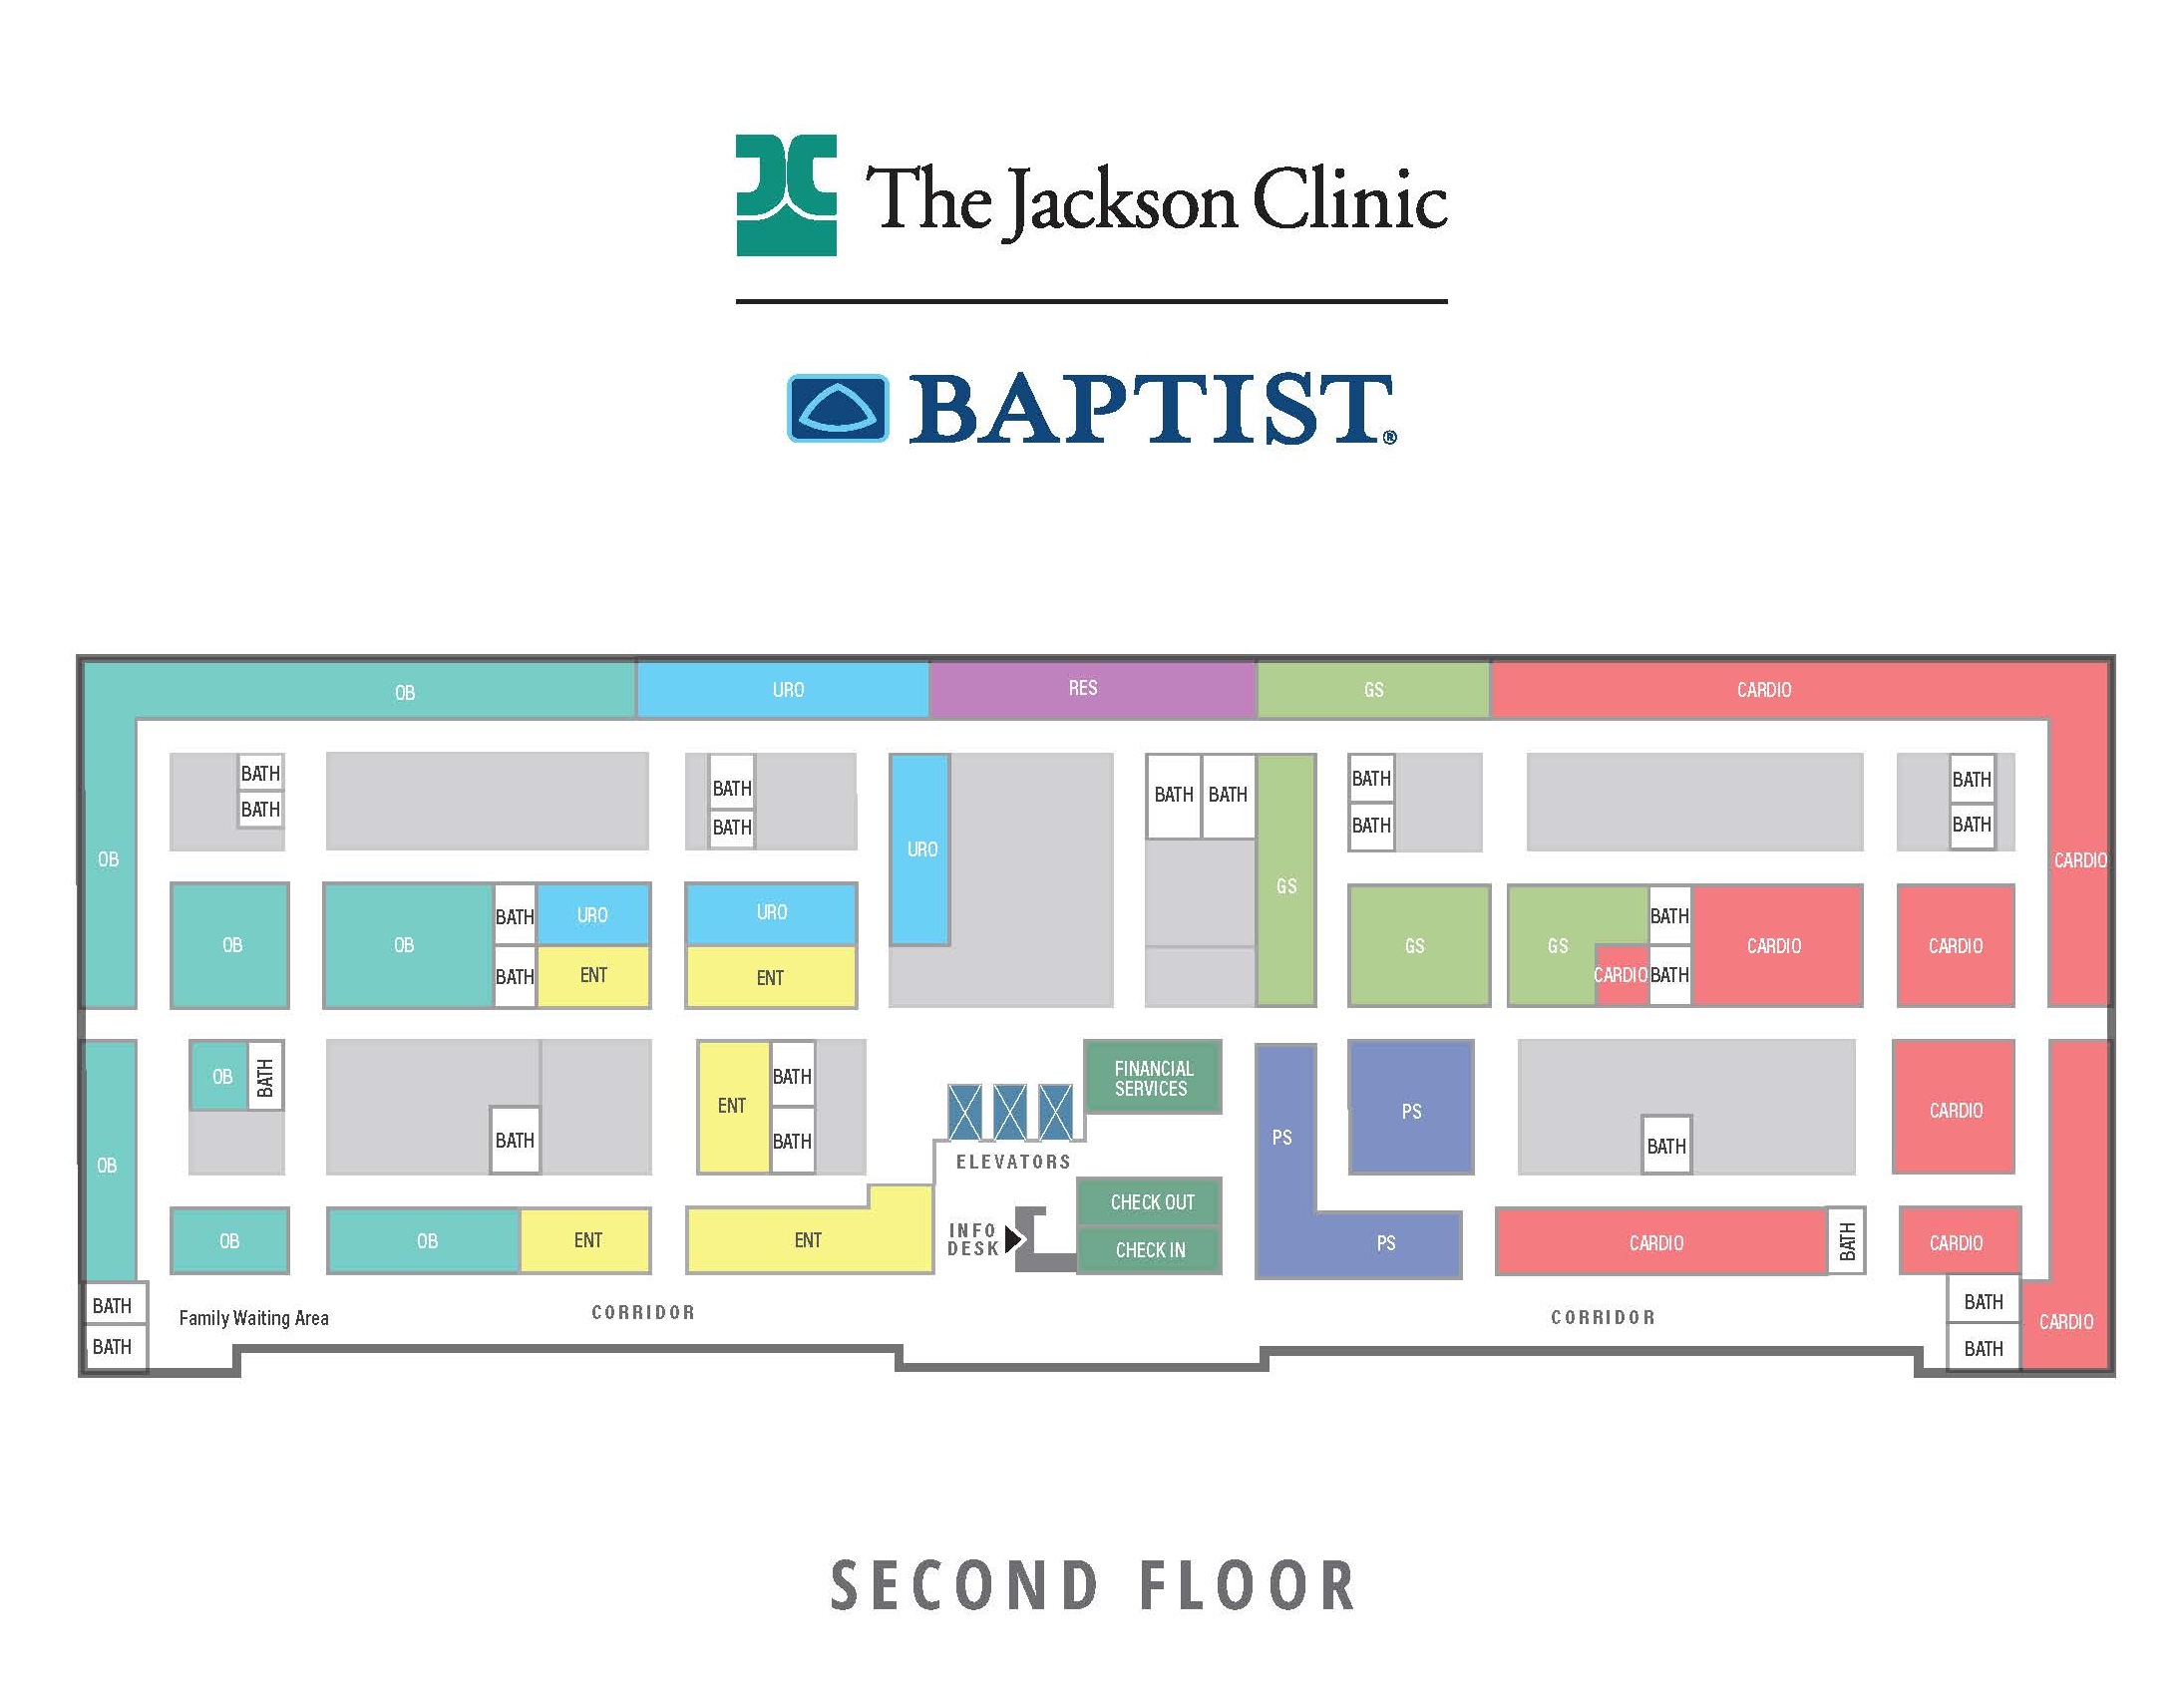 Color coded floor plan map of the Jackson Clinic Baptist Campus second floor